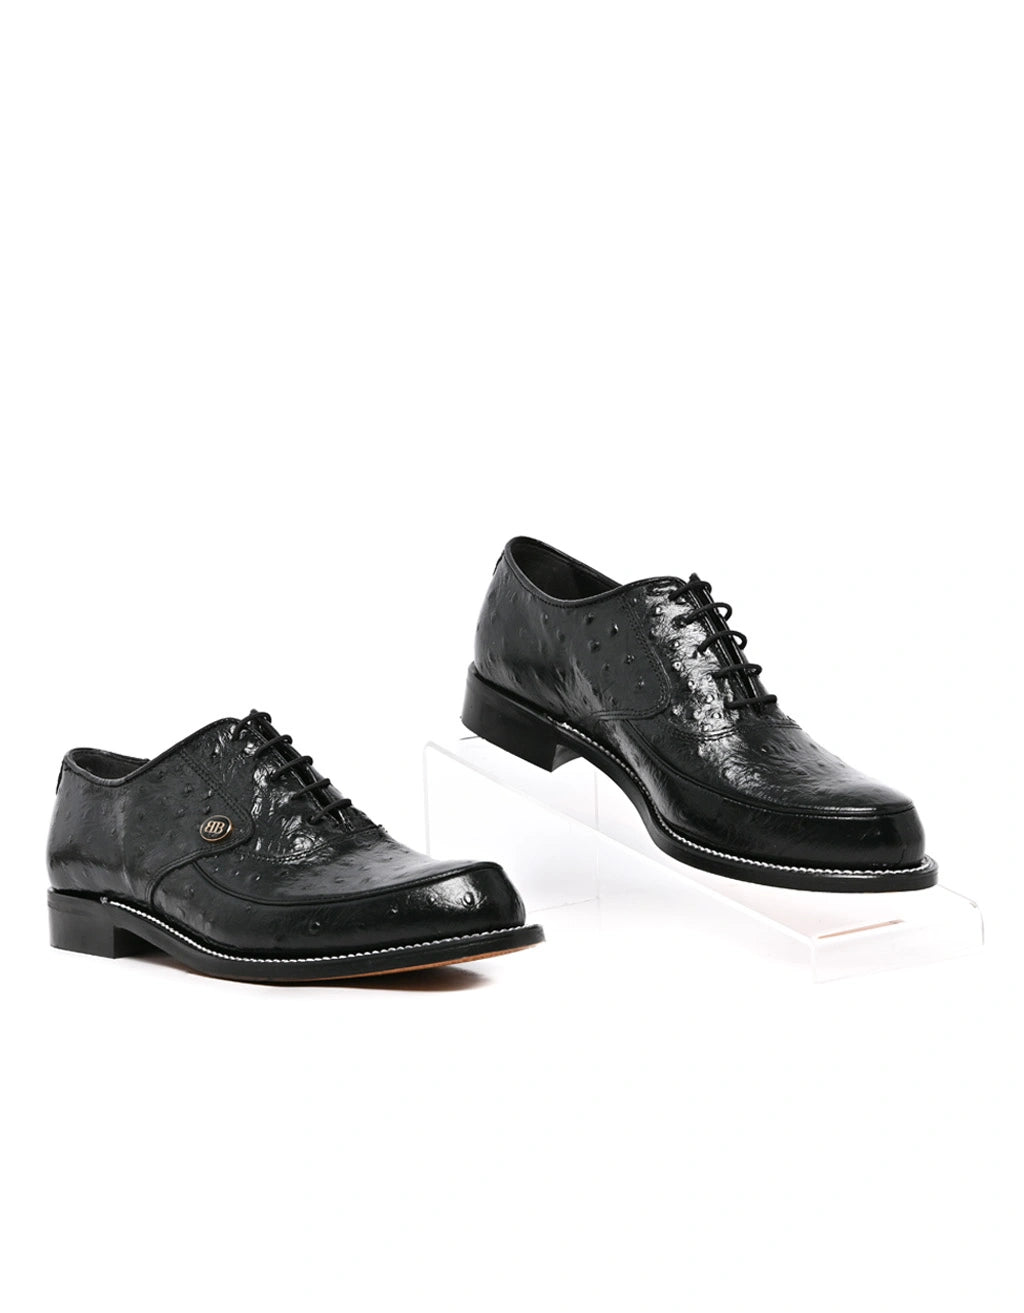 Barker Maxwell Black Lace Up